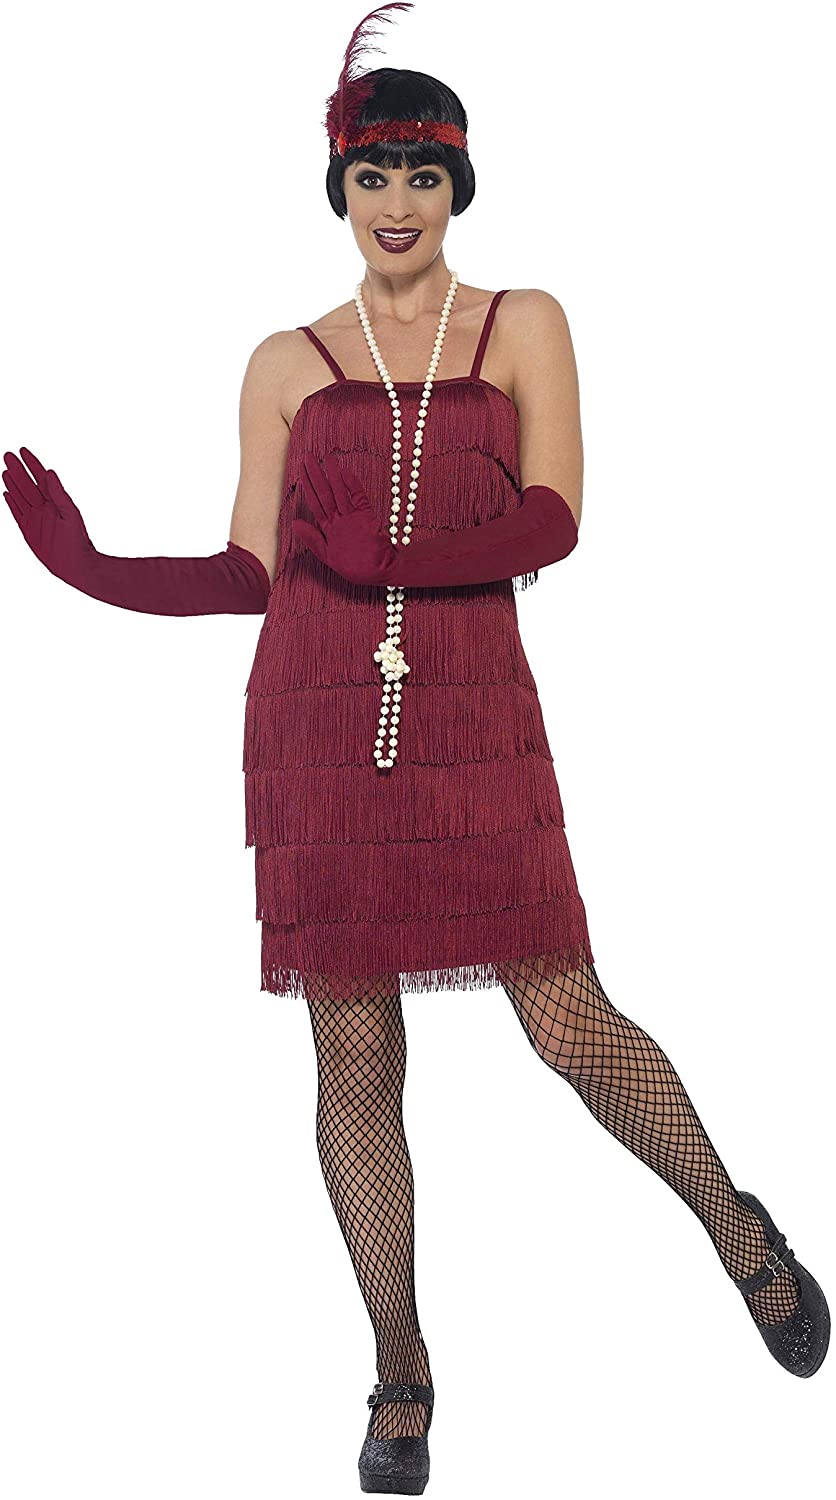 Smiffys Flapper Costume, Red, L - UK Size 16-18